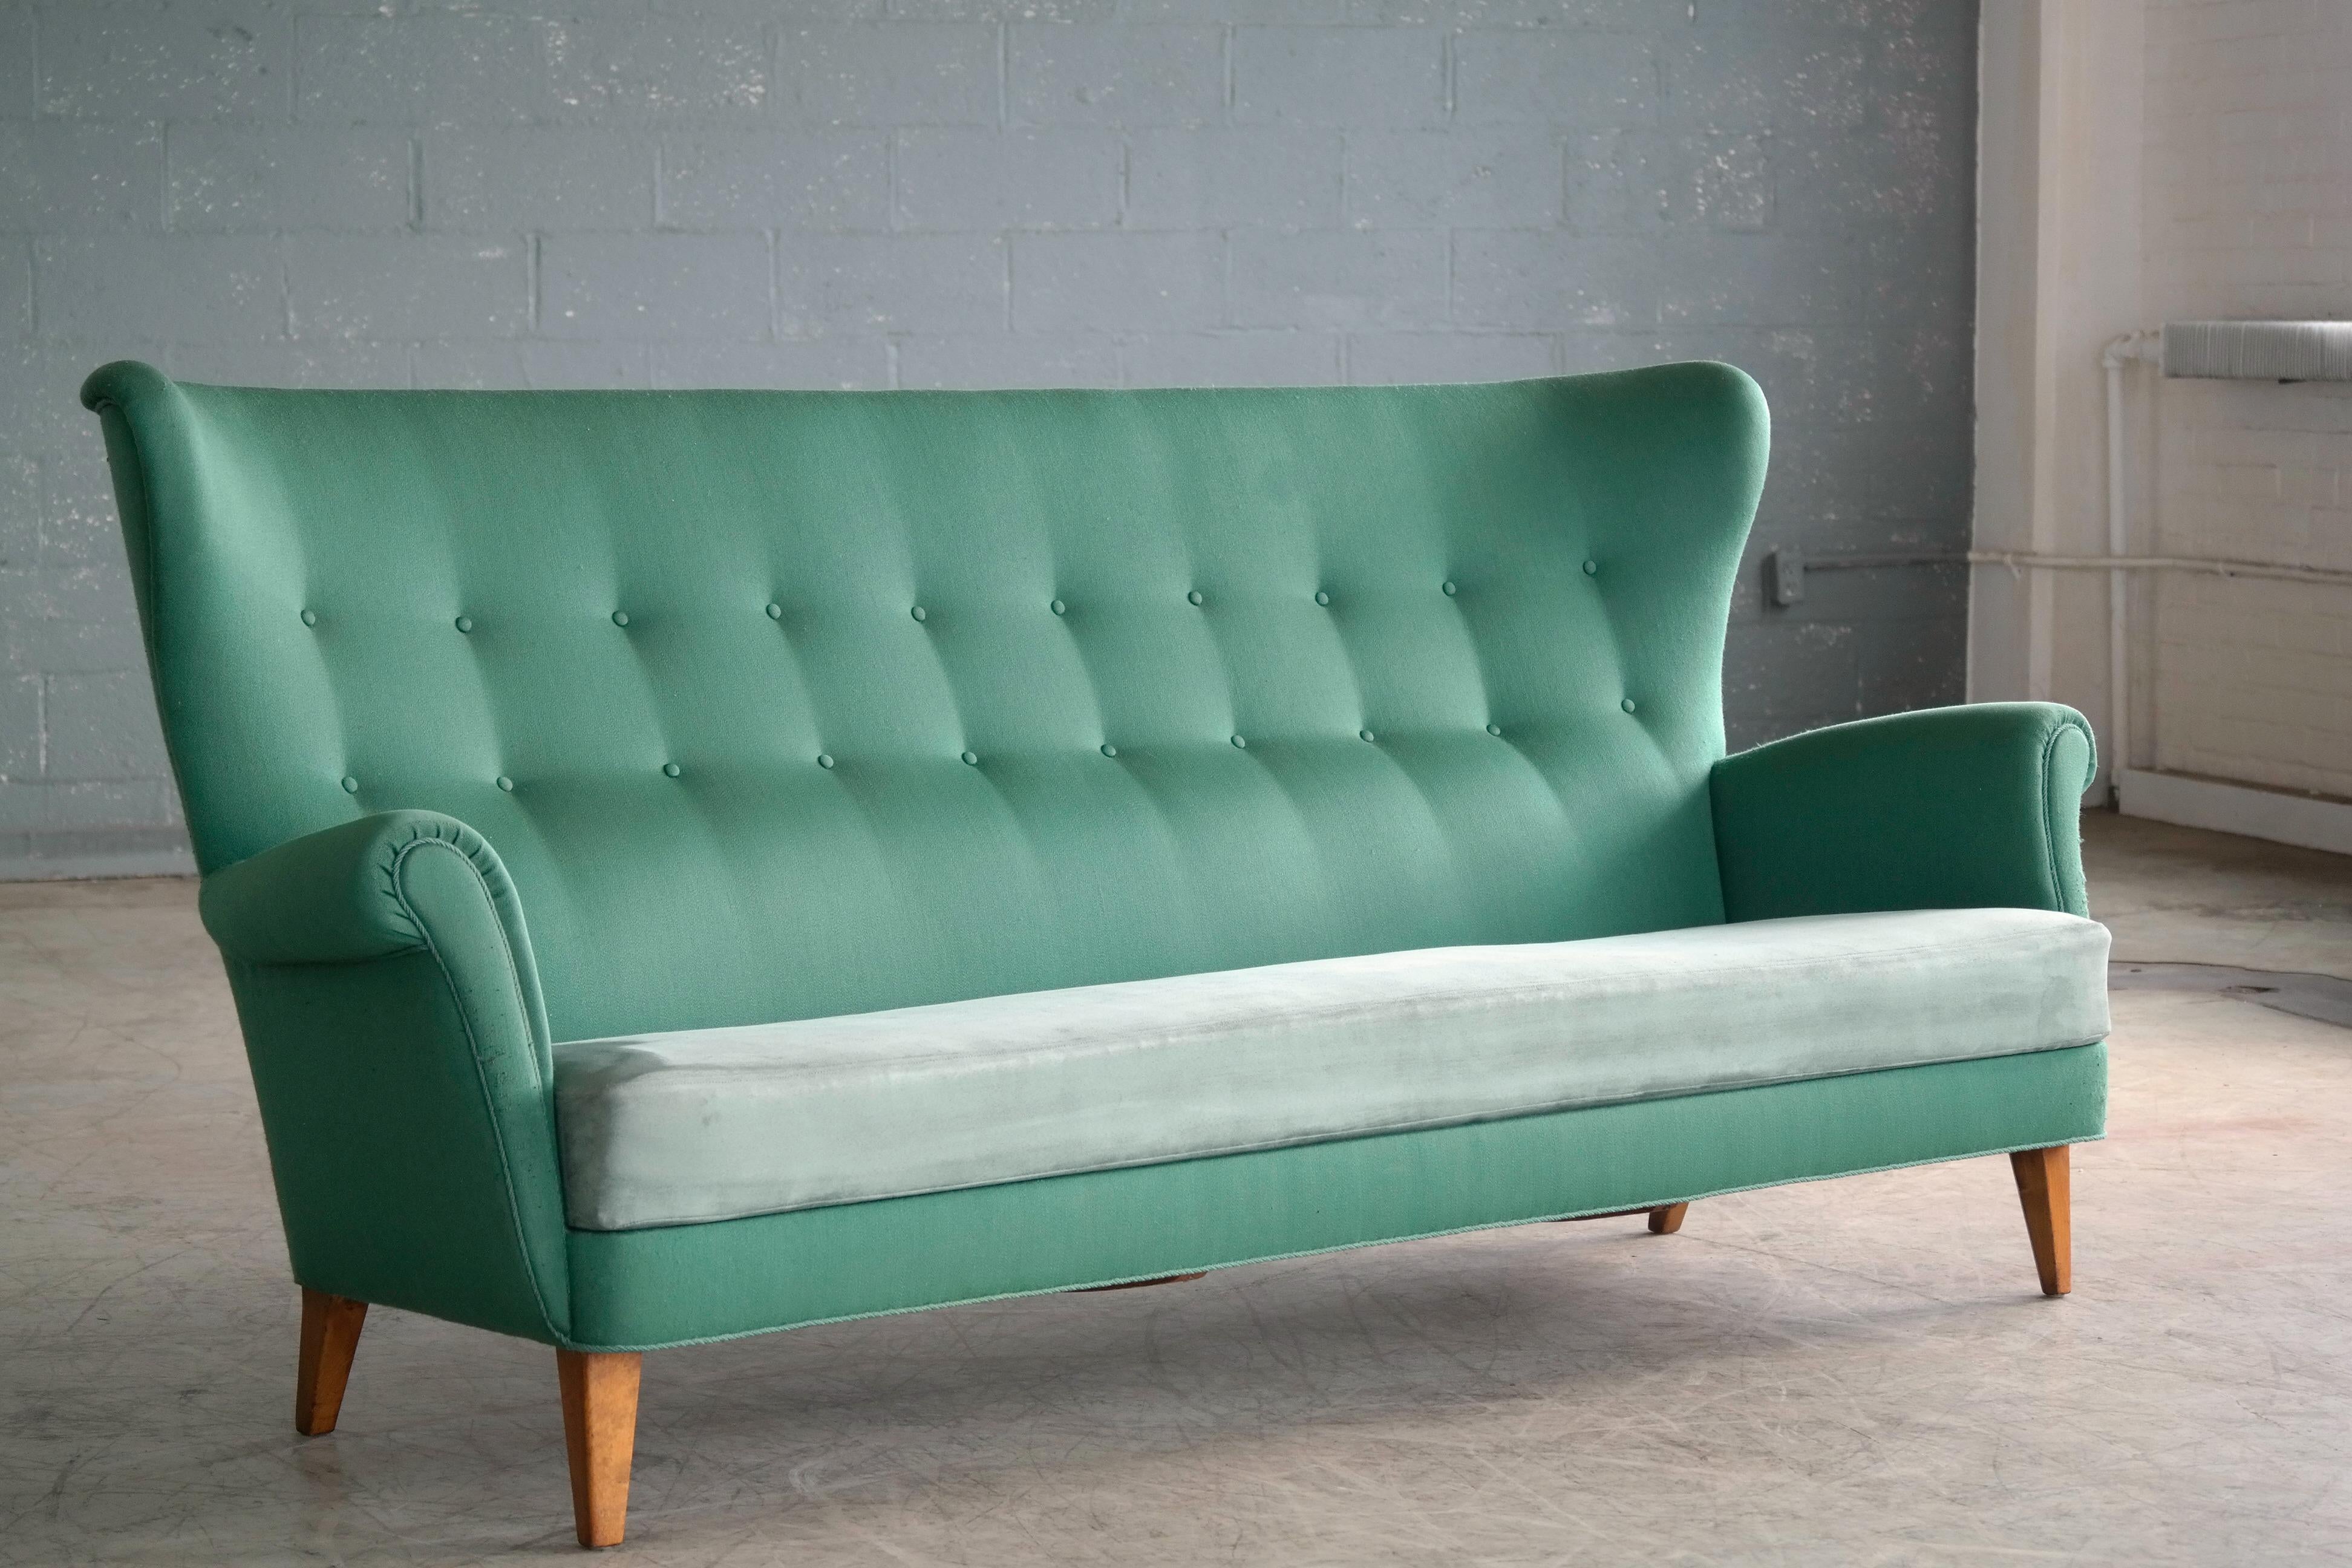 Very charming high back or wingback 1950s sofa from Denmark. The sofa is very reminiscent of Fritz Hansen's model 8112 loveseat but in this case somewhat larger and with a loose seat cushion covered in ultra suede and we are unsure of who the